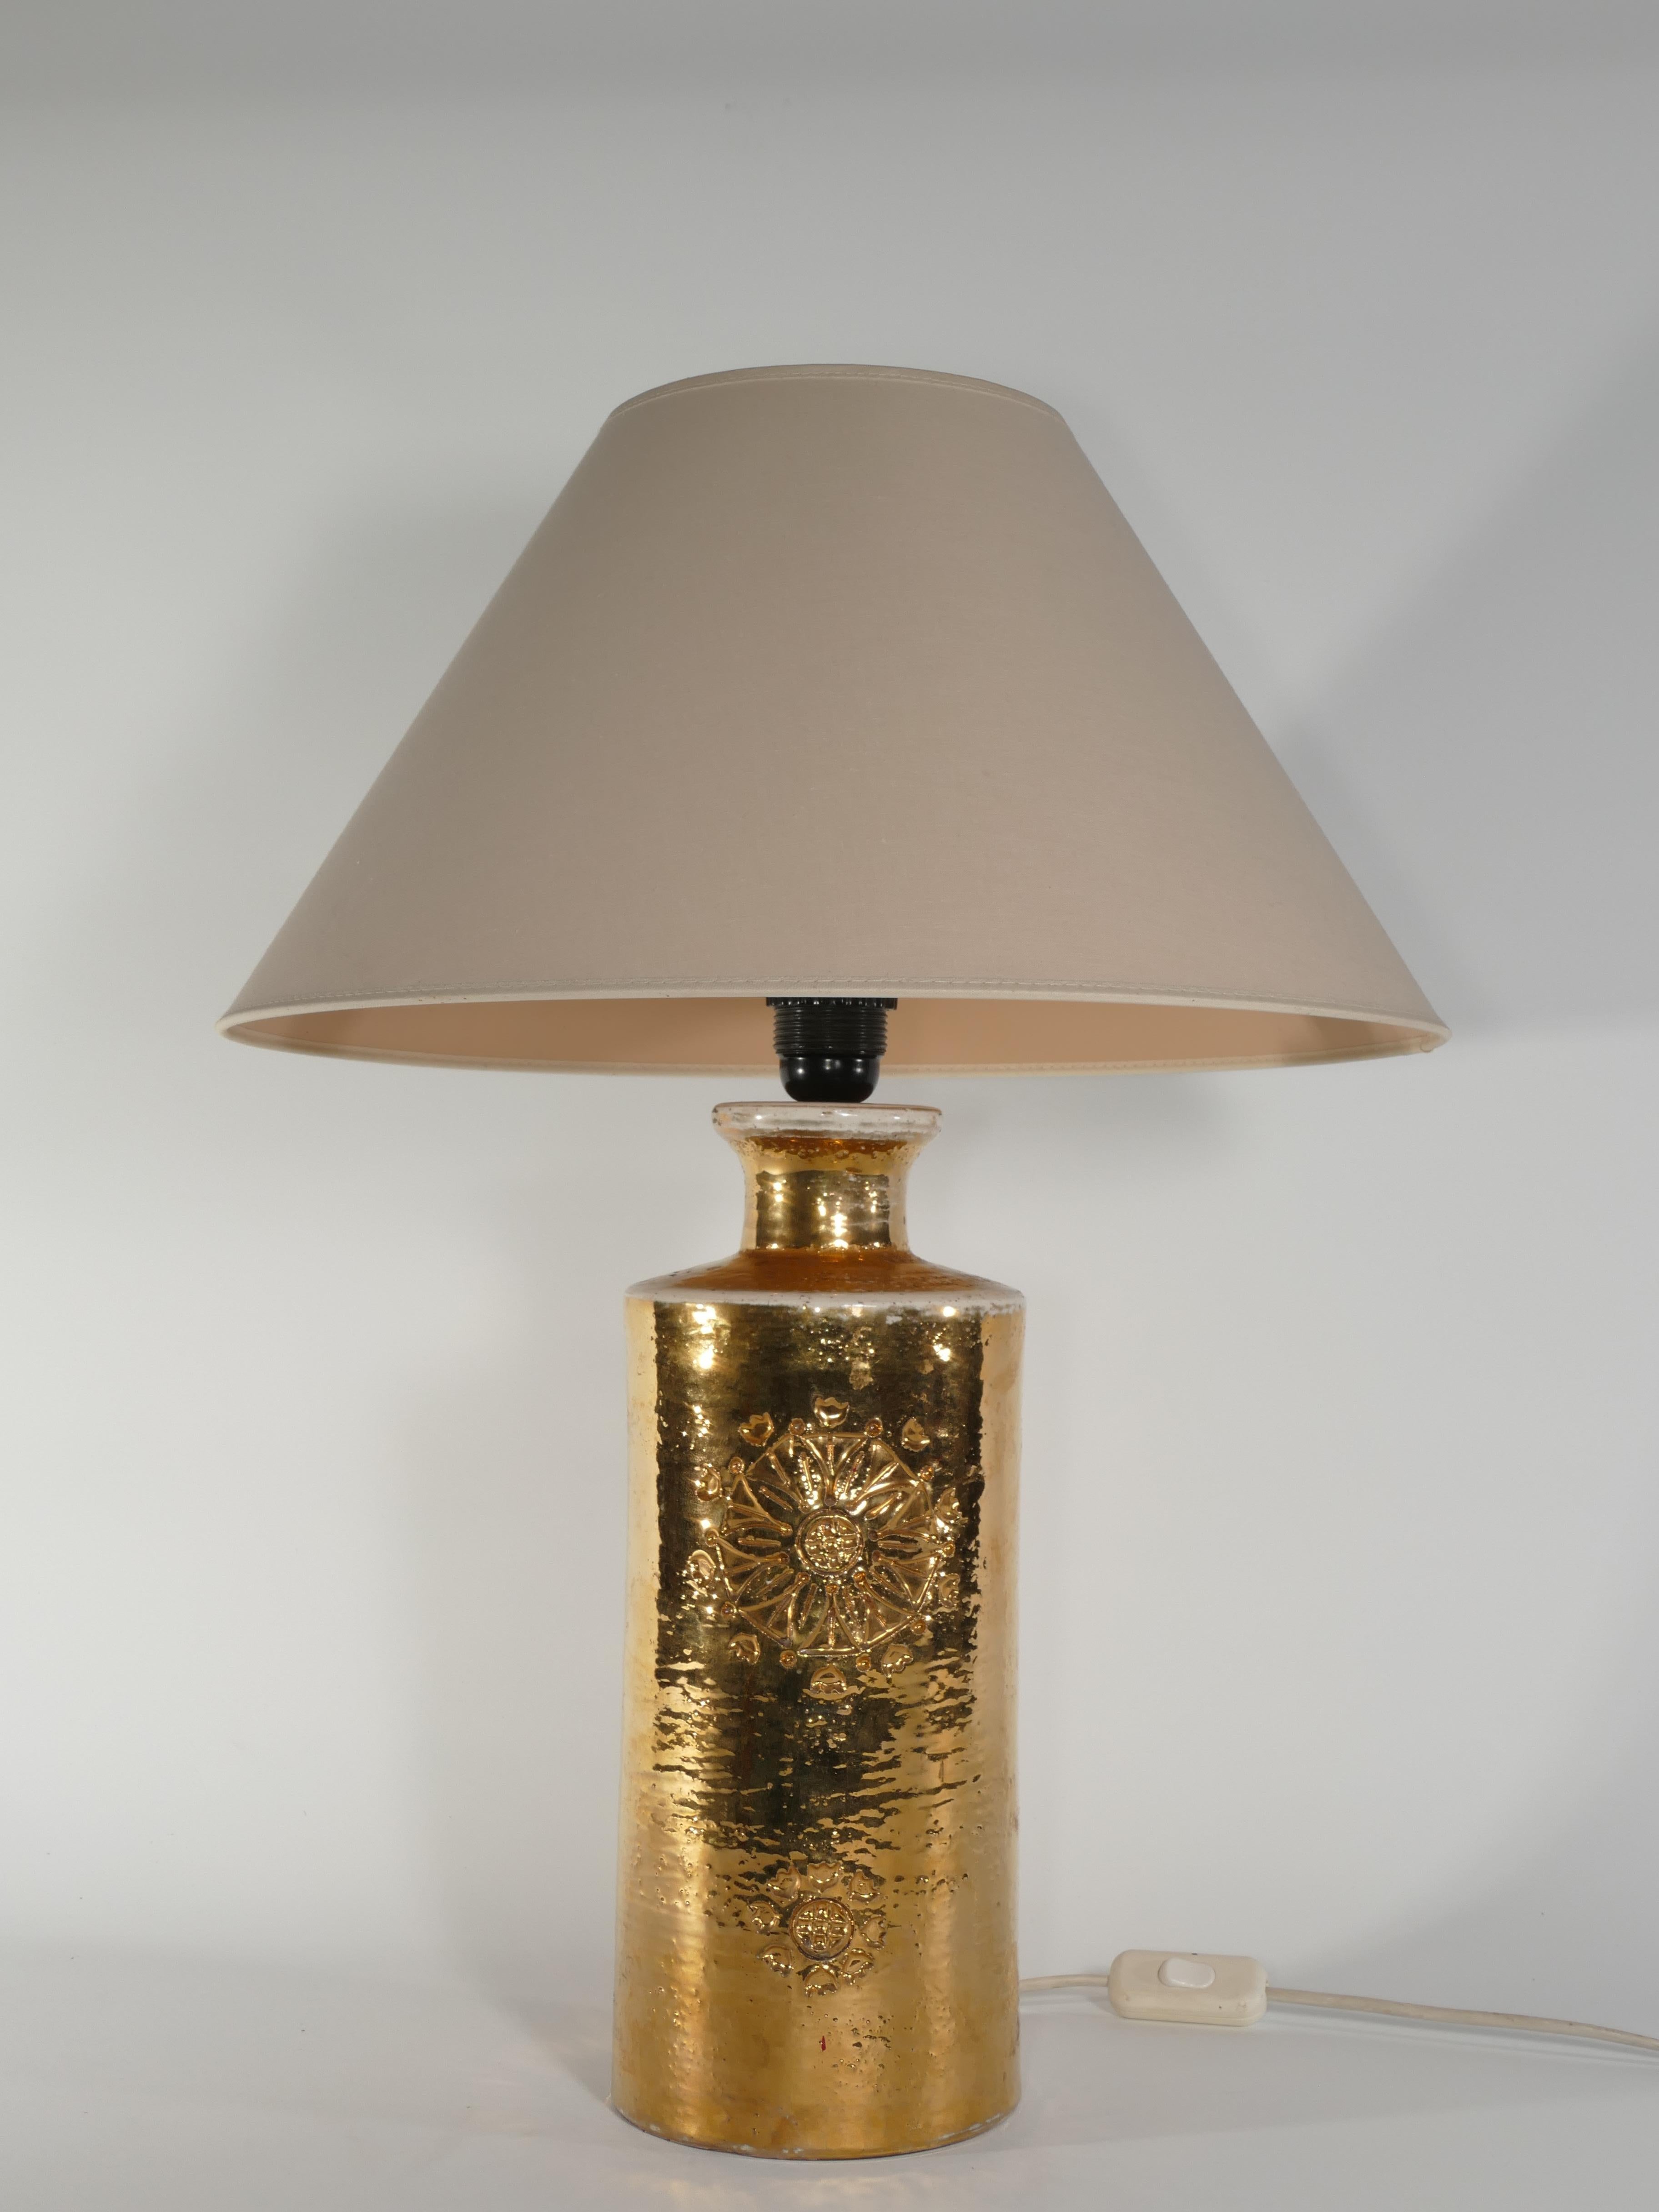 A ceramic table lamp by Bitossi for Bergboms, featuring a luxurious 22-Karat Gold Glaze.

Presenting a striking table lamp crafted by Bitossi for Bergboms, these pieces showcase exquisite 22-karat gold glazed ceramic adorned with delicate floral